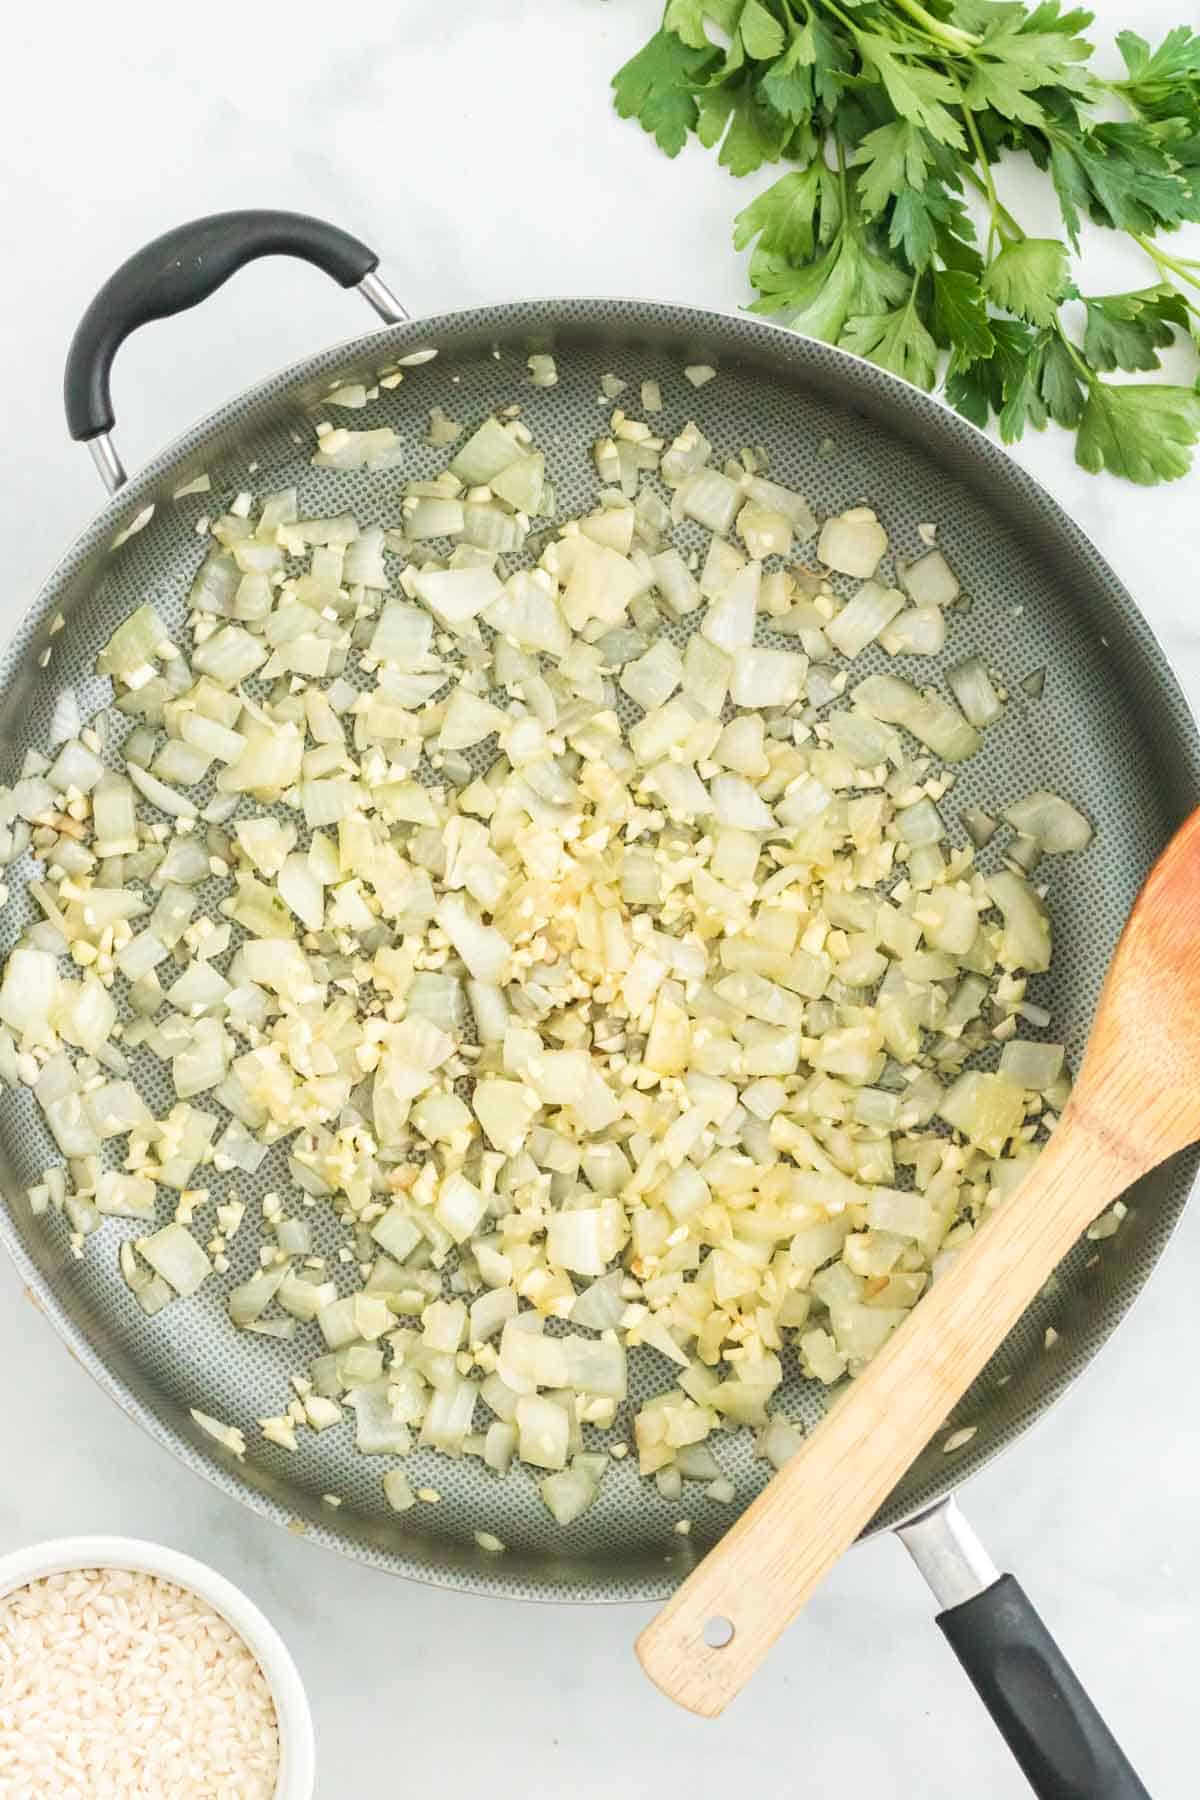 Diced and sauteed onions in a skillet next to a wooden spoon.